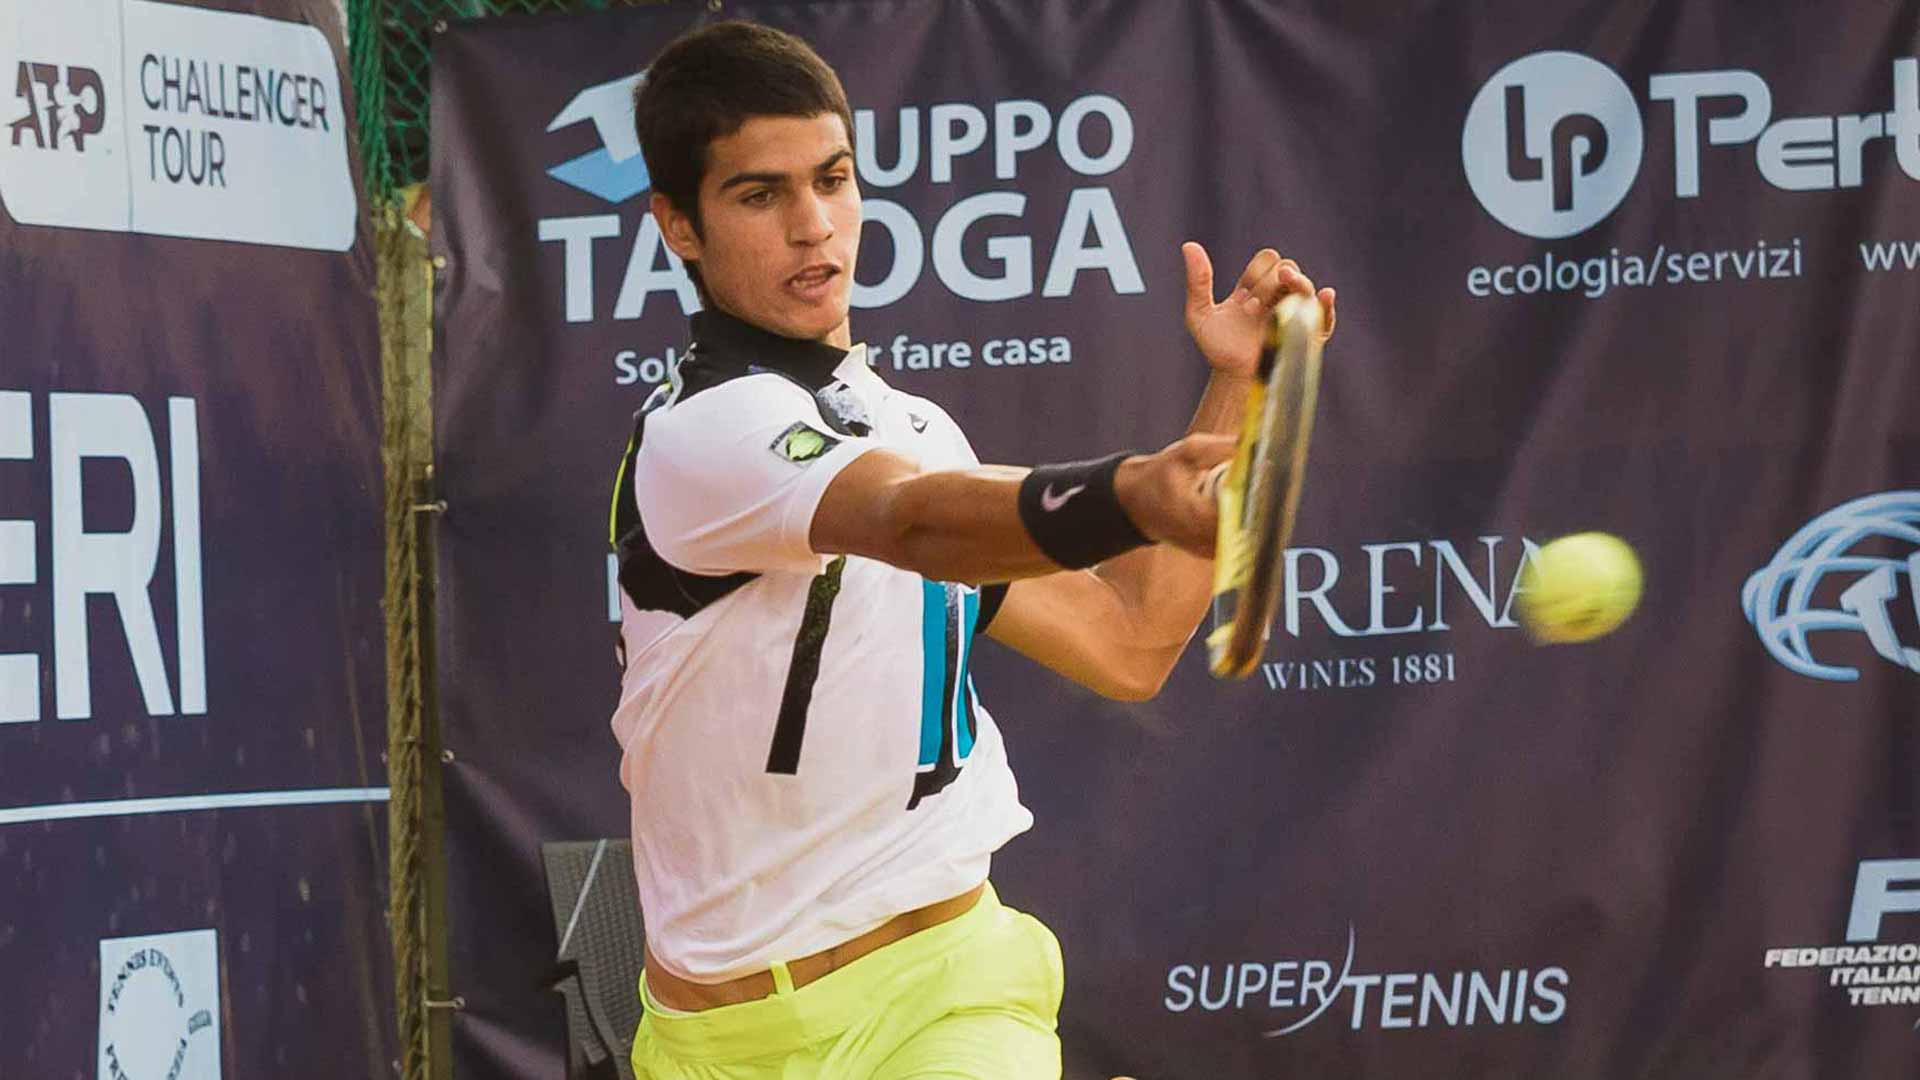 Carlos Alcaraz, pictured at the Trieste Challenger in 2020, won four titles at the Challenger level.